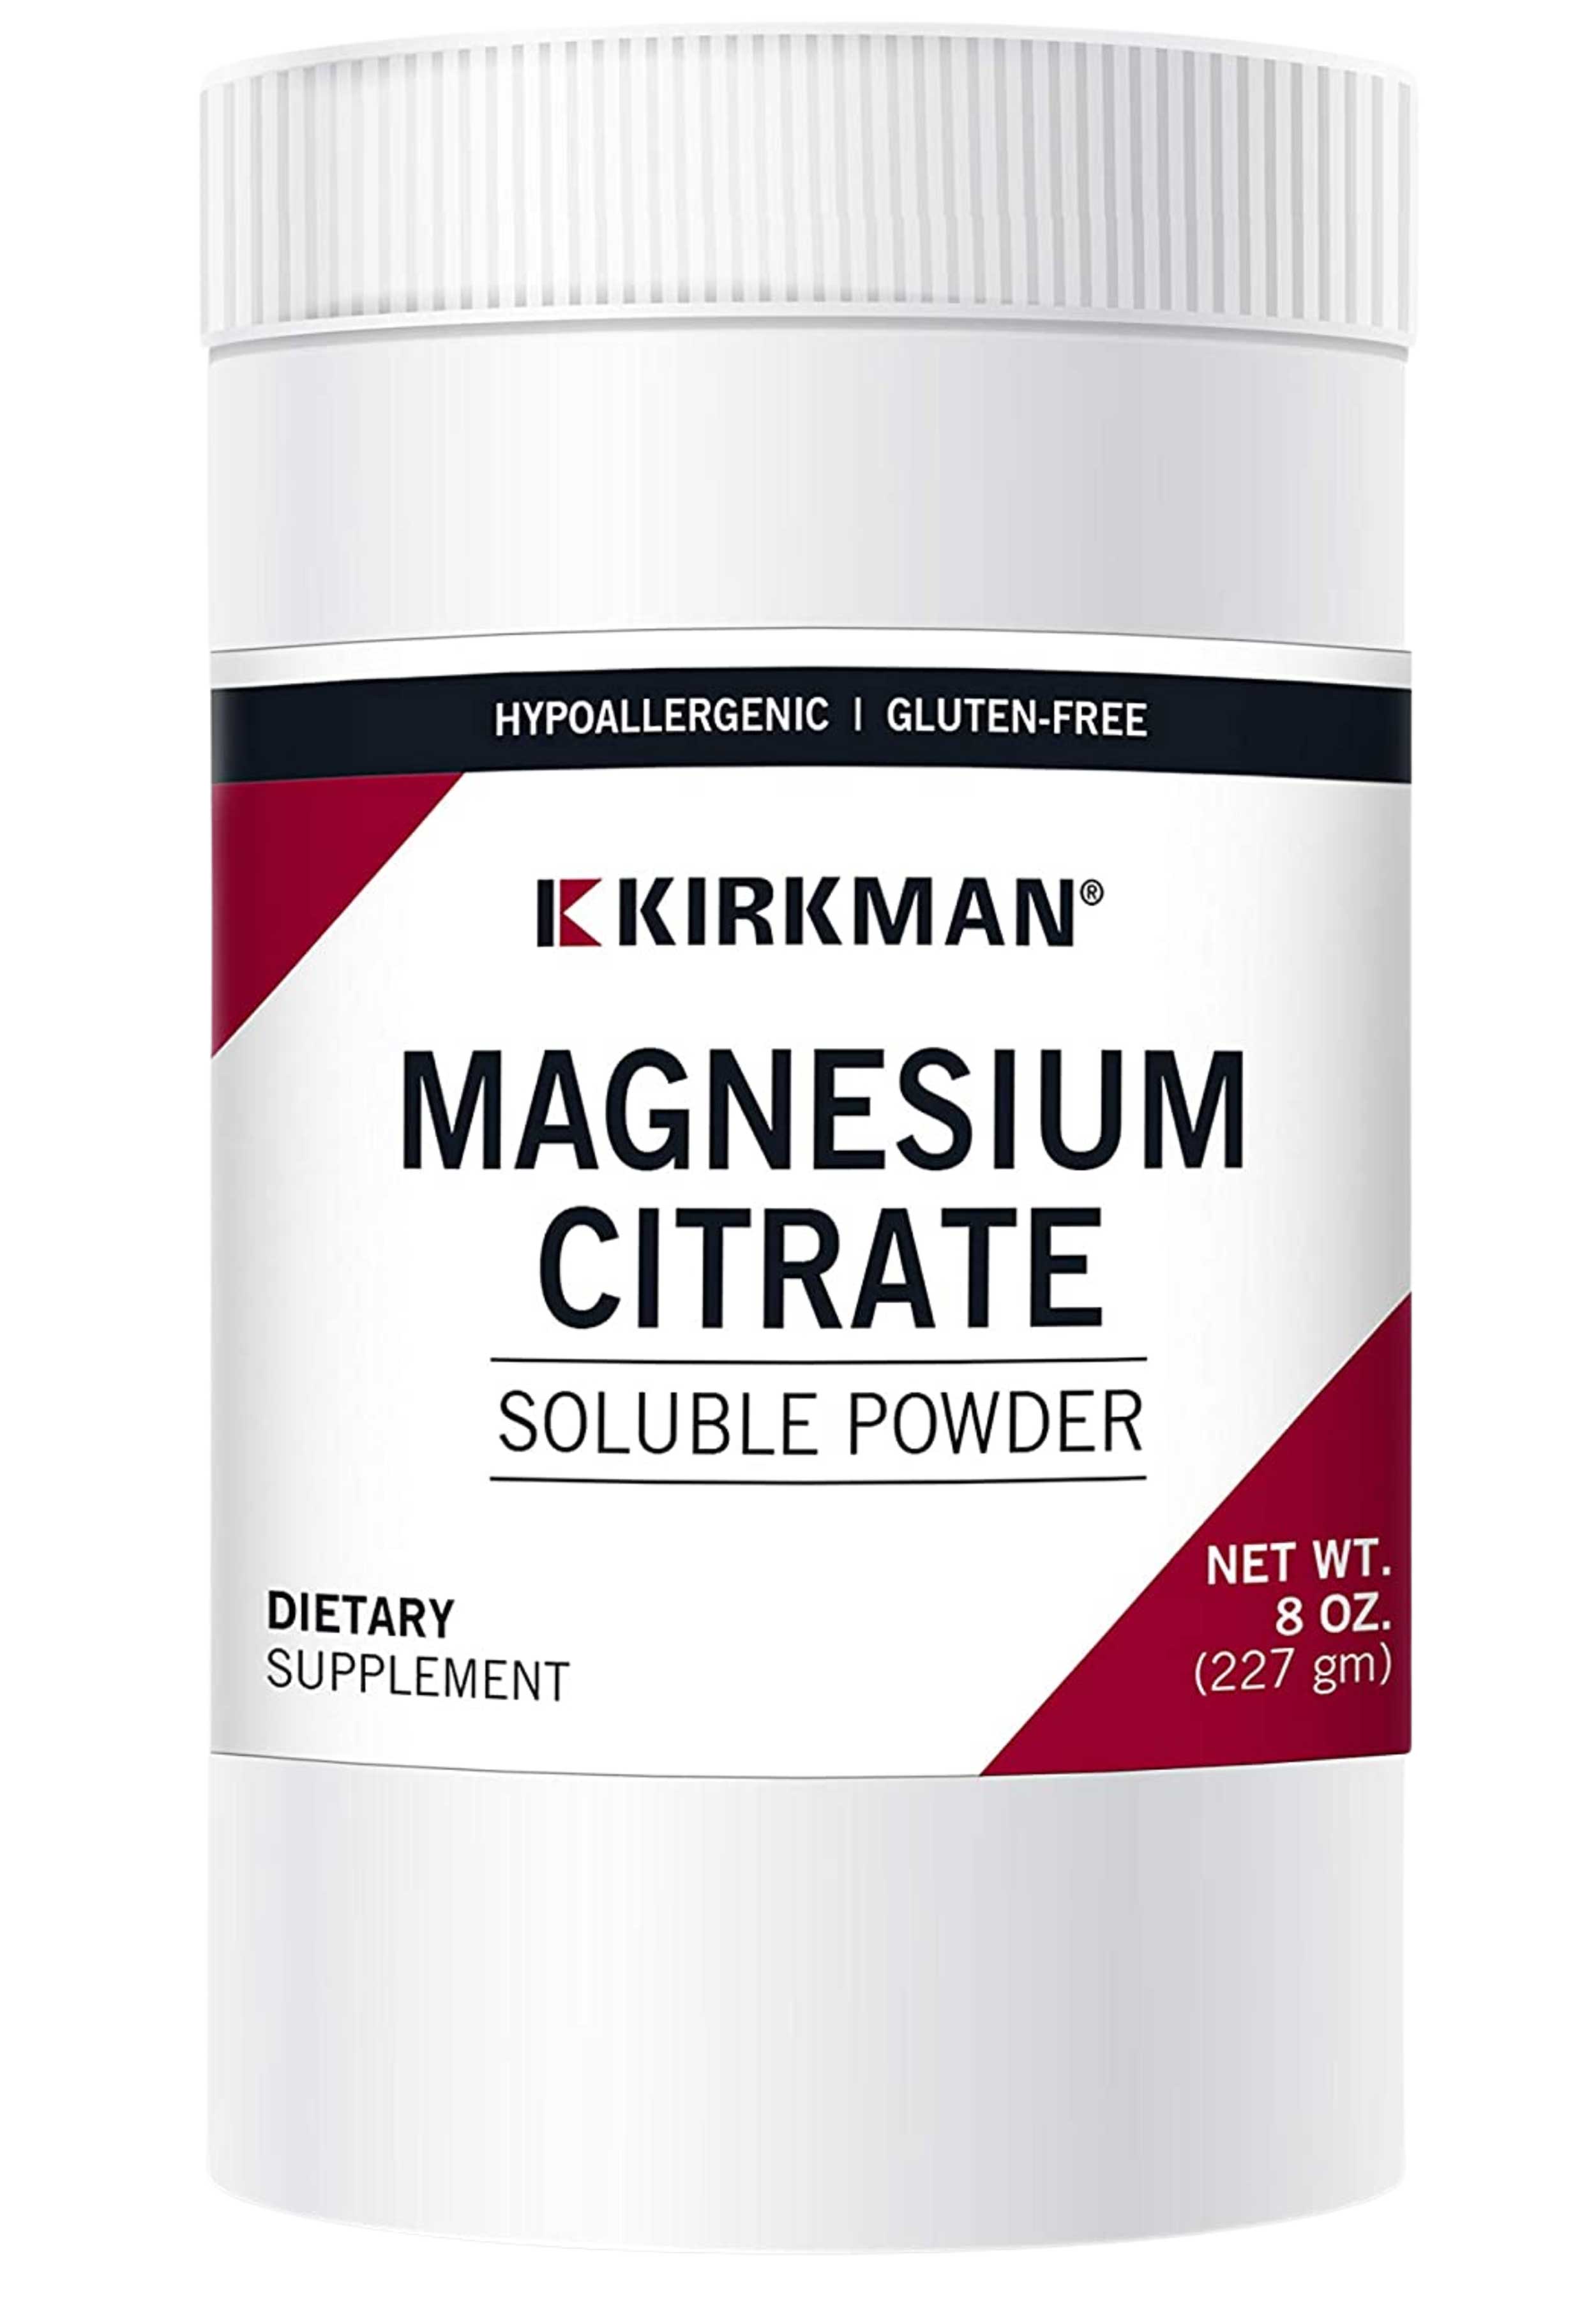 Kirkman Magnesium Citrate Soluble Powder